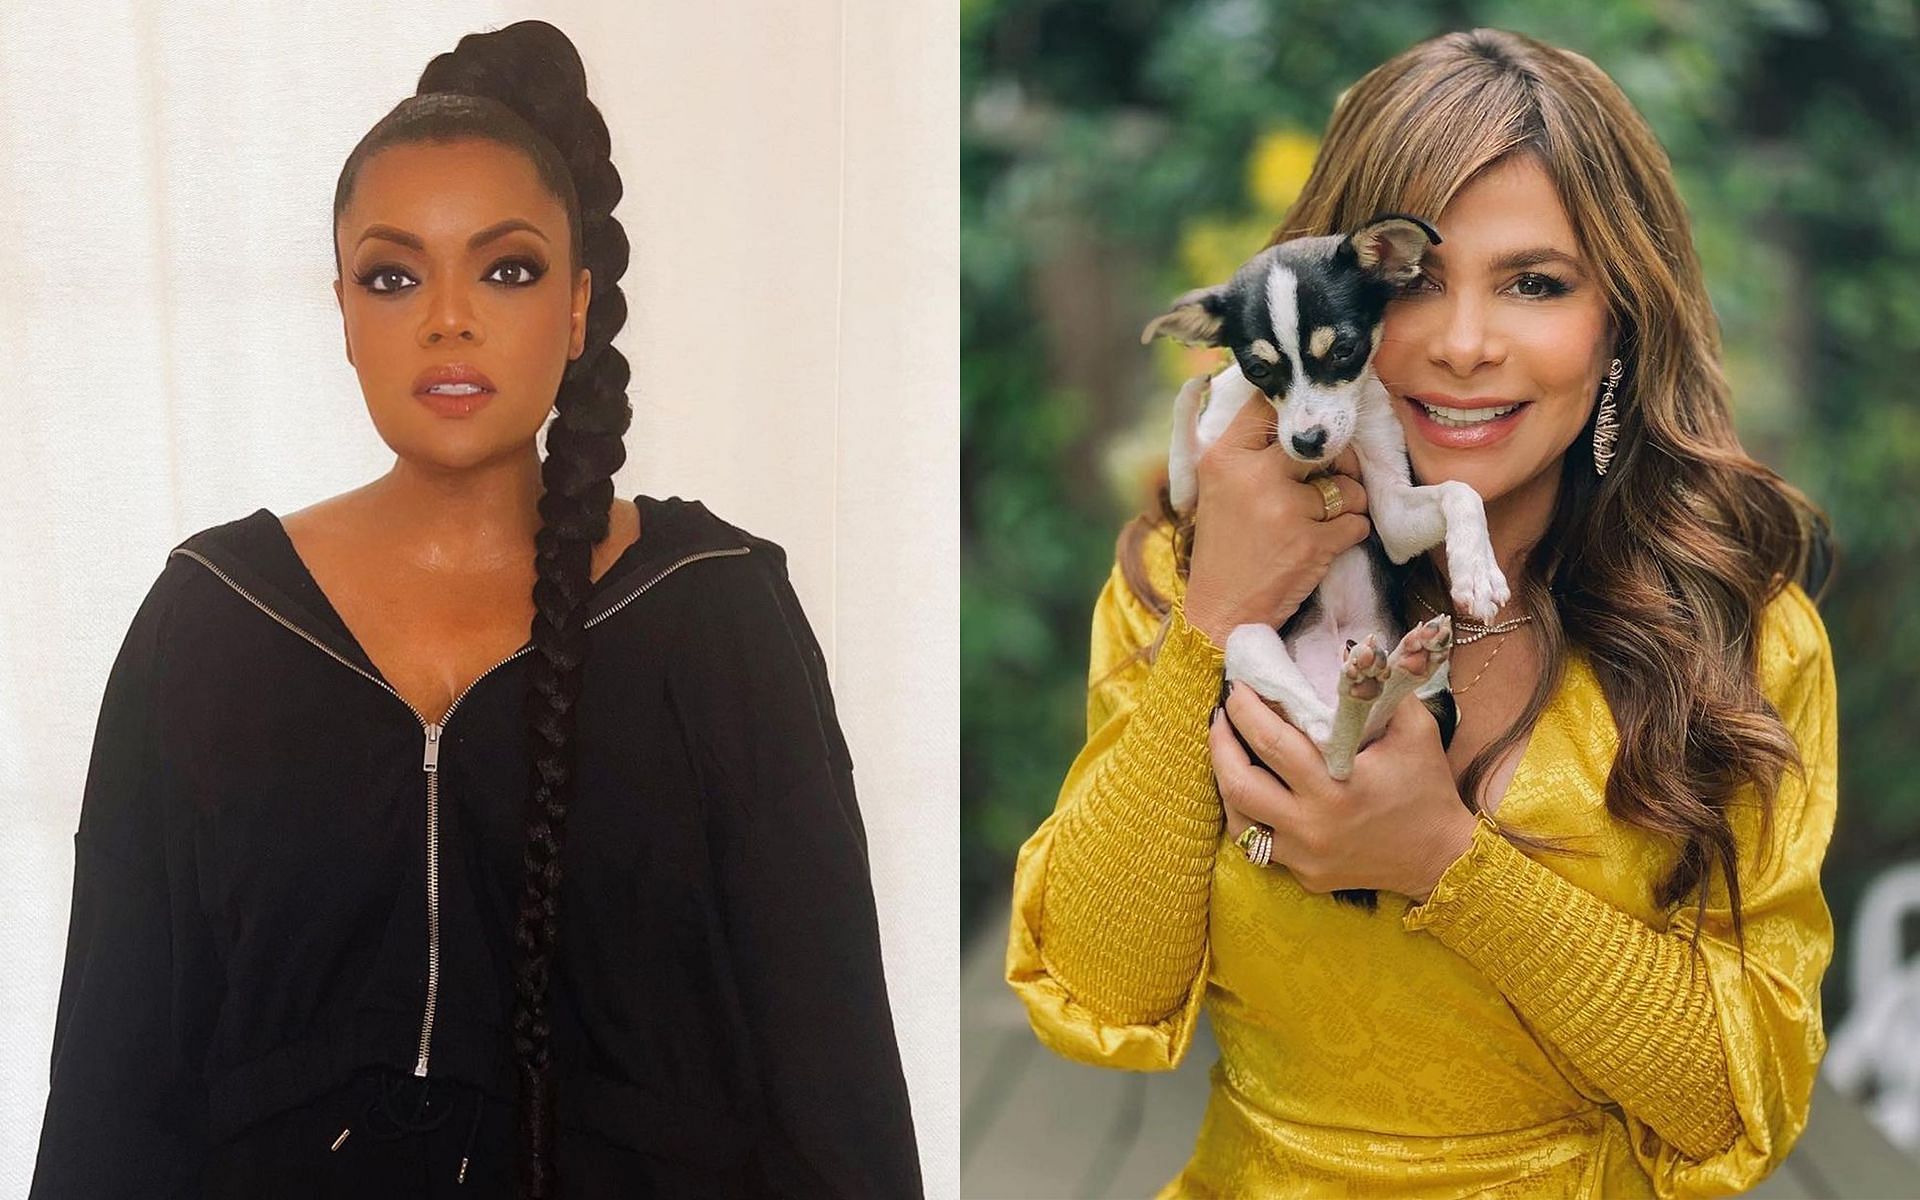 Paula Abdul is the richest judge on The American Rescue Dog Show followed by Yvette Nicole Brown (Image via @yvettenicolebrown and @paulaabdul/Instagram)